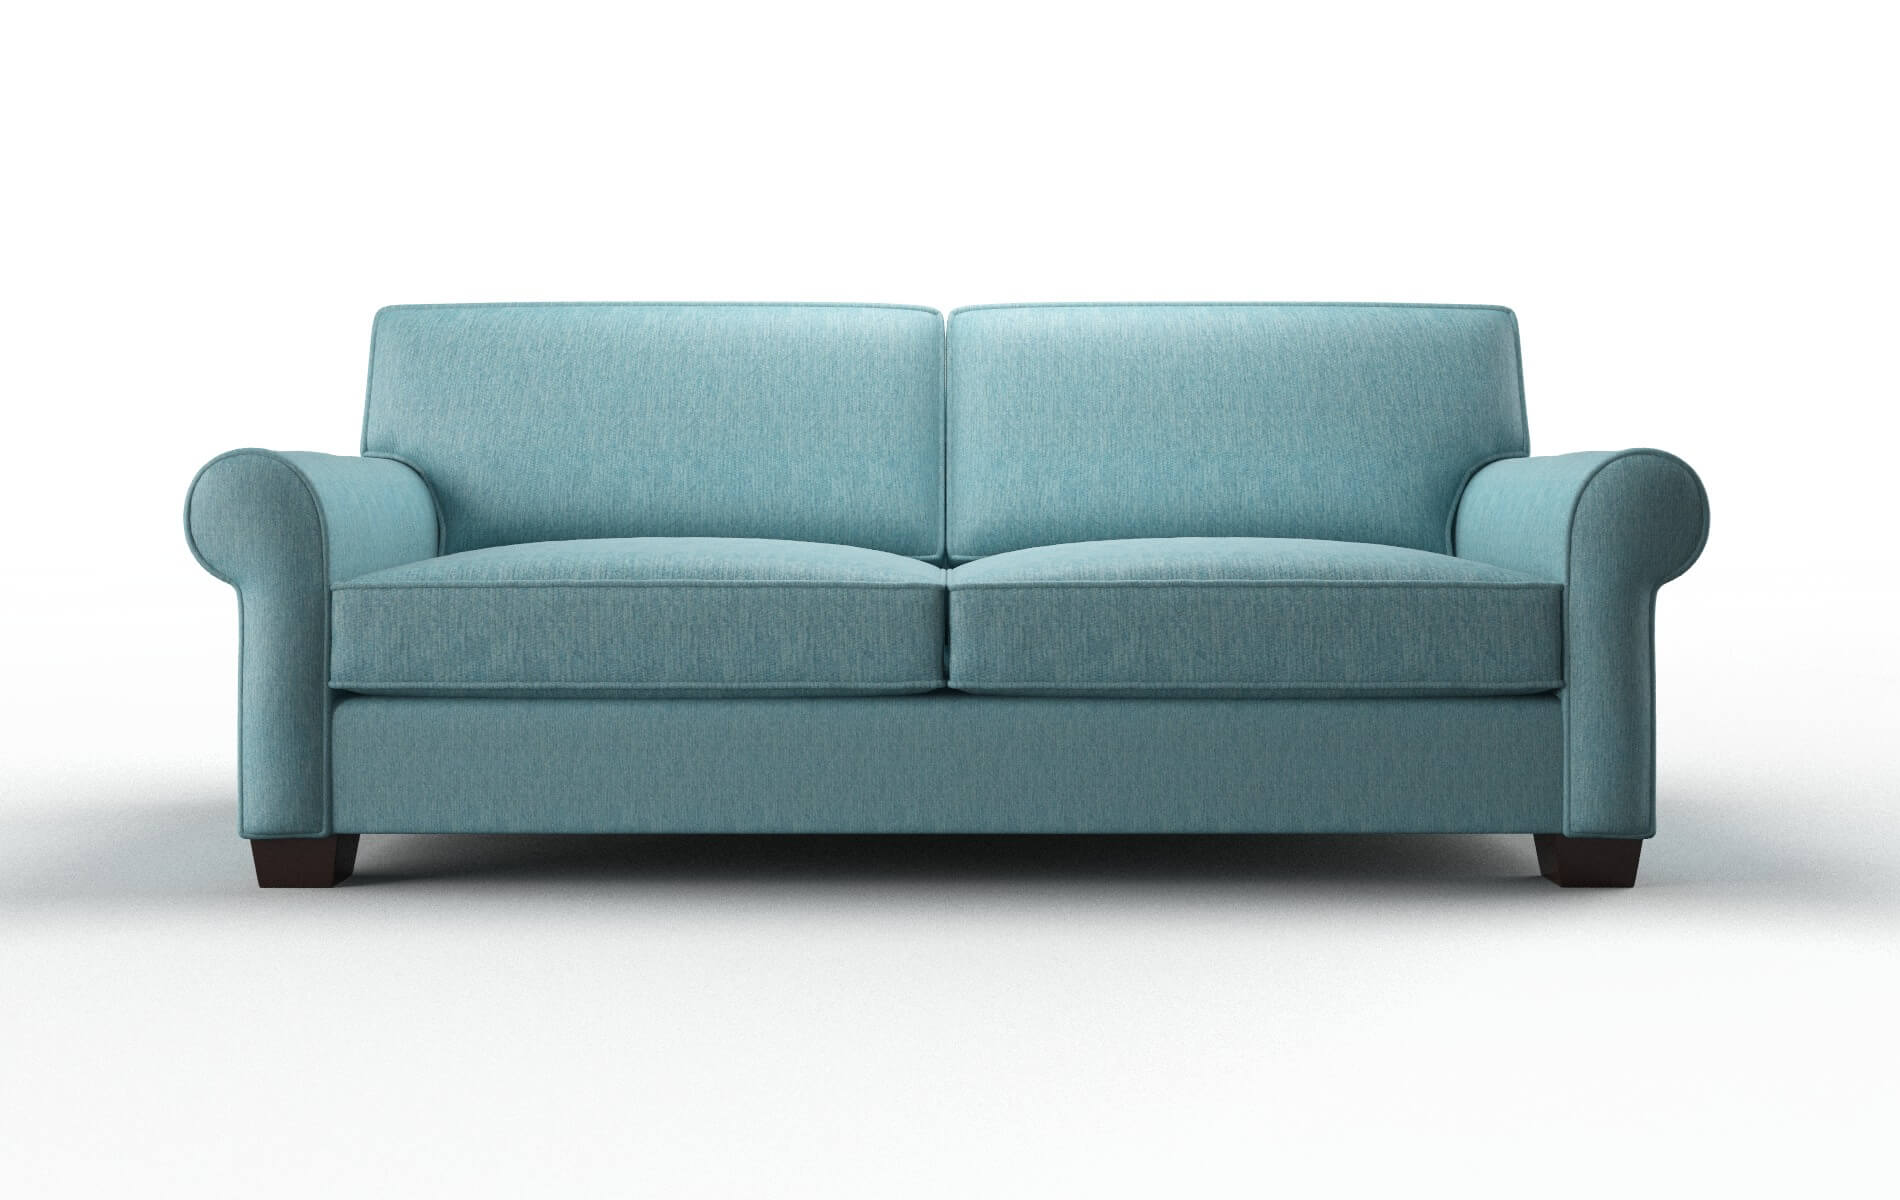 Isabel Cosmo Turquoise chair espresso legs